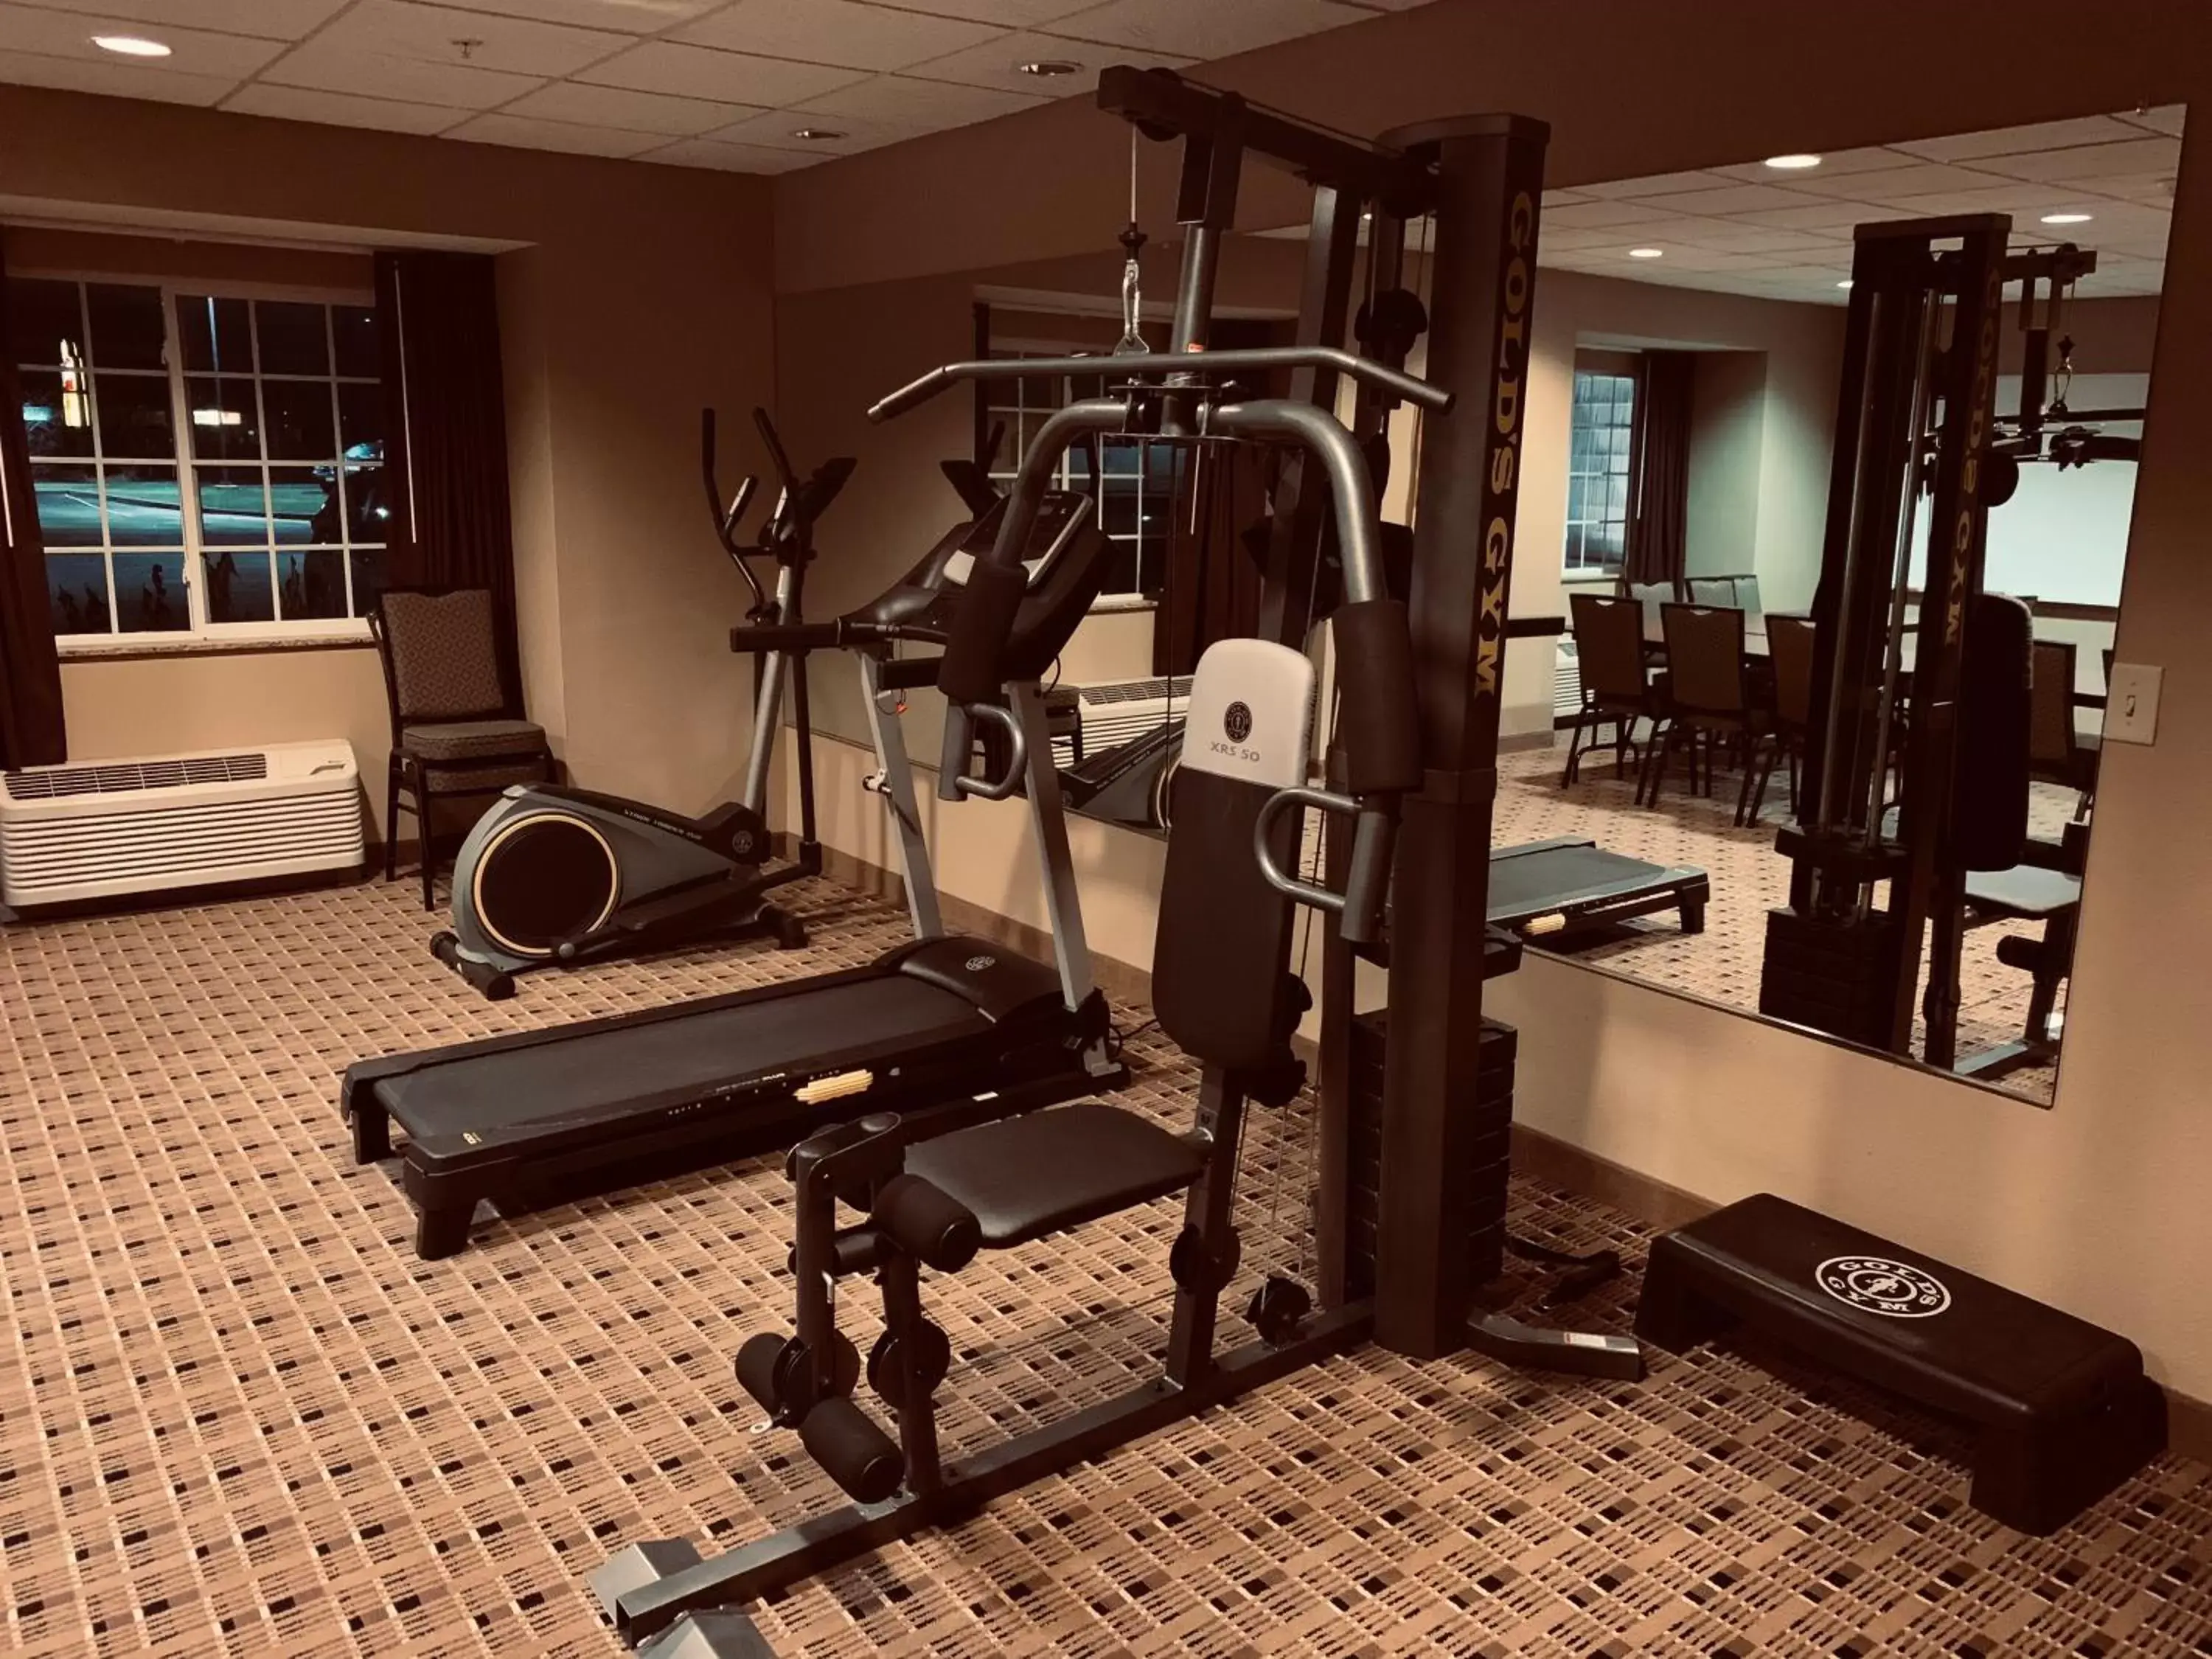 Fitness centre/facilities, Fitness Center/Facilities in Microtel Inn & Suites-Sayre, PA